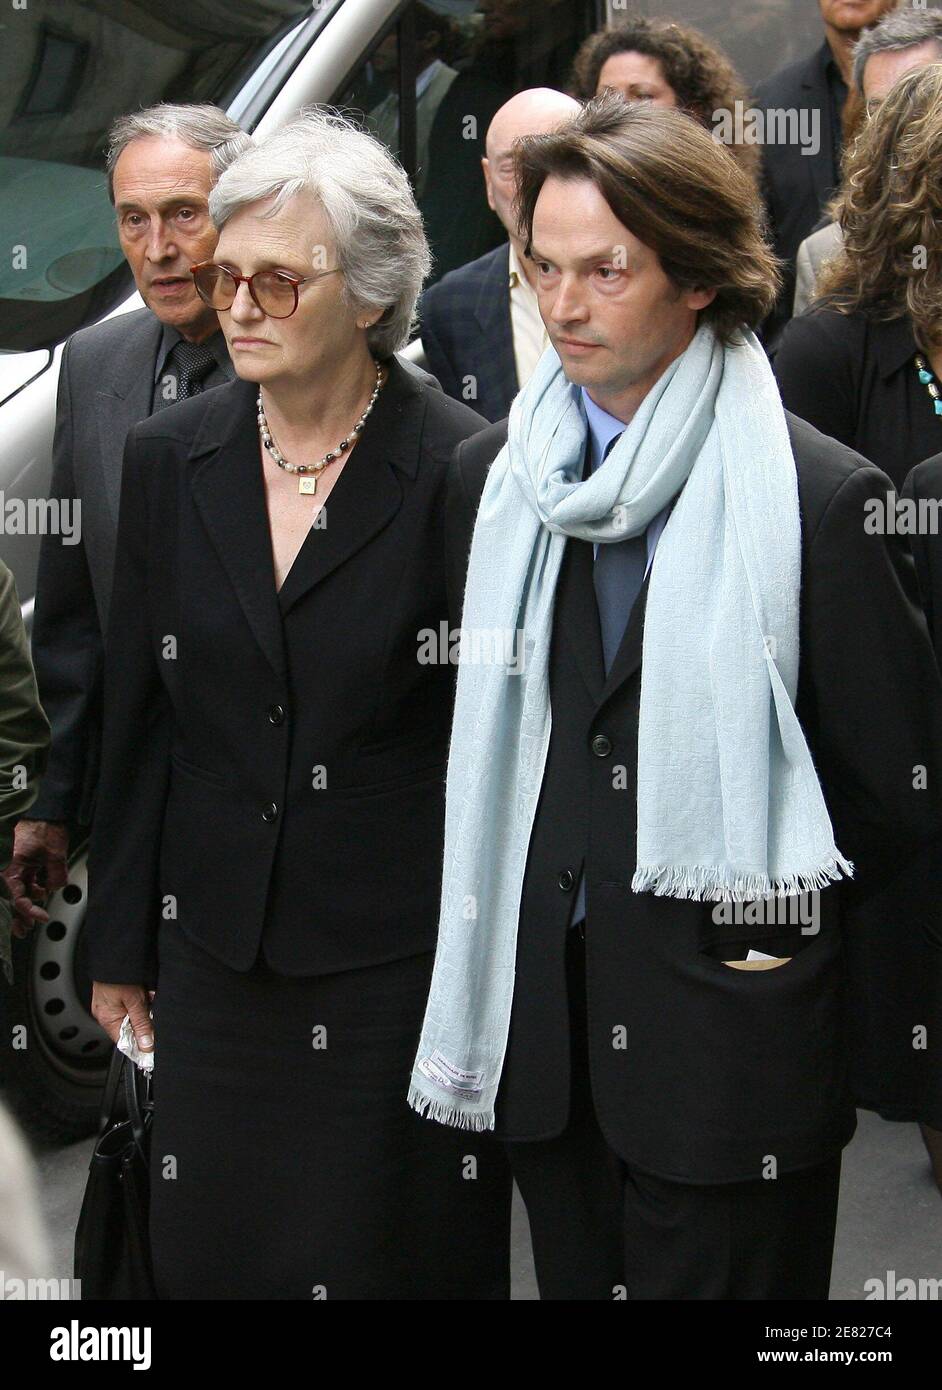 Bruno Finck leaves the funeral mass for his partner, French actor Jean-Claude  Brialy held at 'Saint-Louis en l'Ile' church in Paris, France on June 4,  2007. Photo by ABACAPRESS.COM Stock Photo -